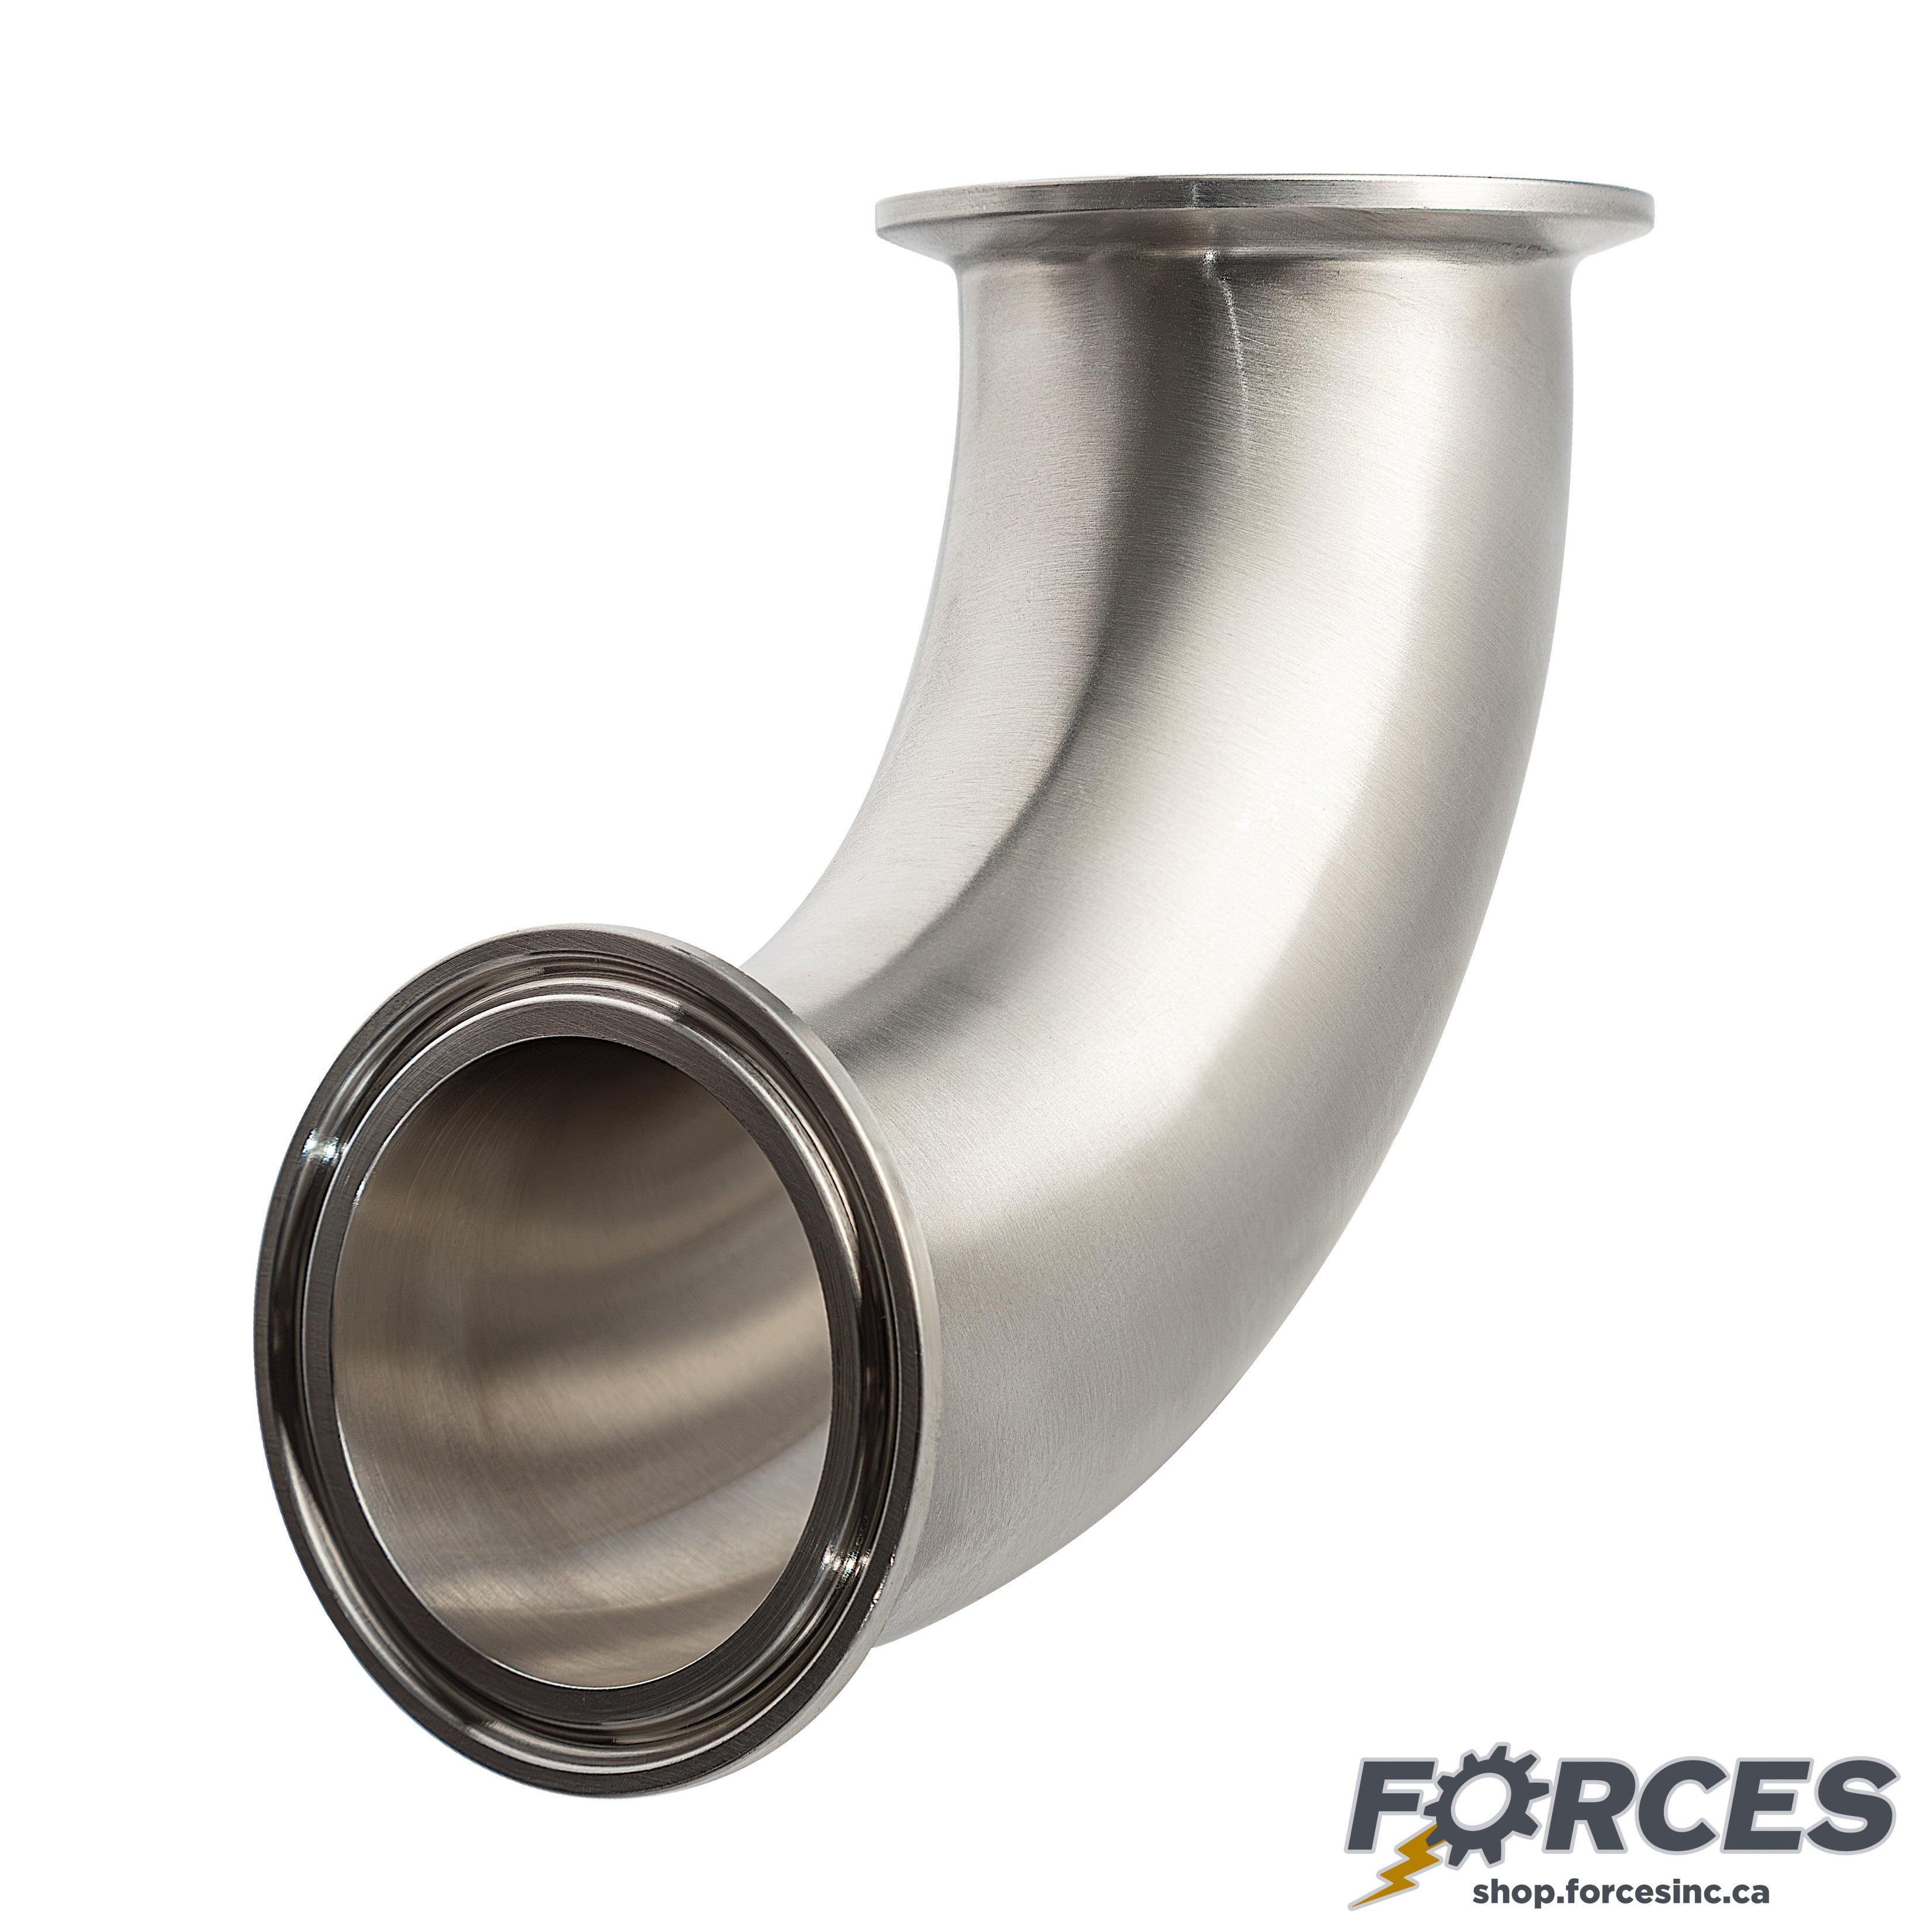 6" Tri-Clamp 90° Elbow - Stainless Steel 316 - Forces Inc